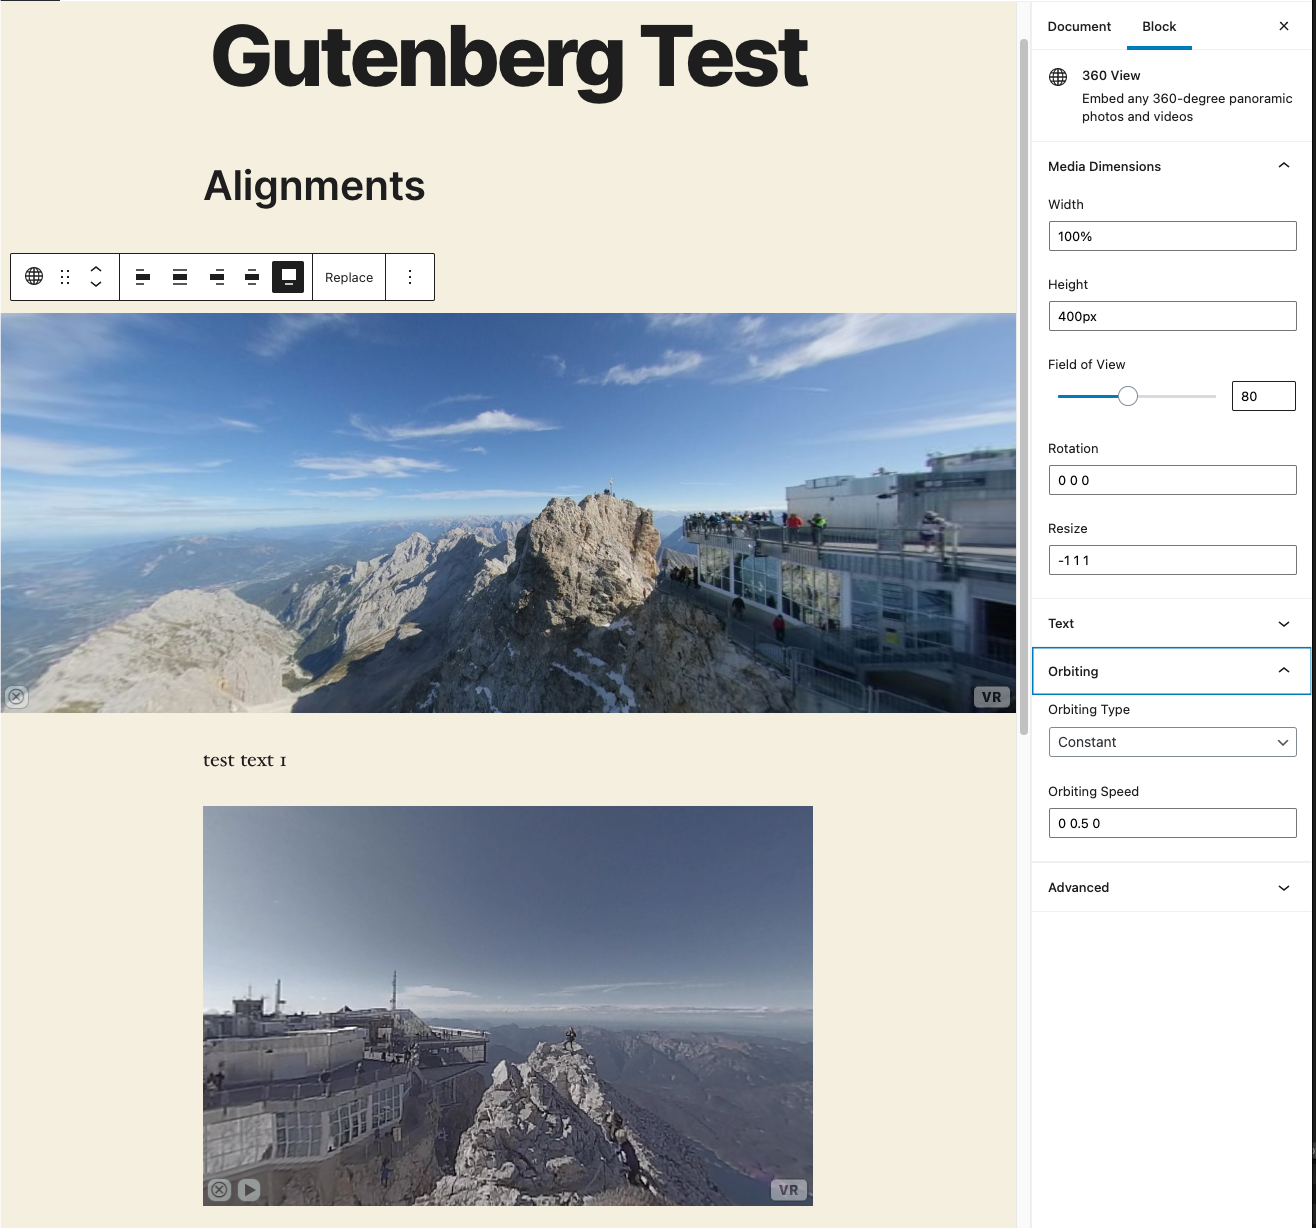 Fully compatible with Wordpress Gutenberg Editor.